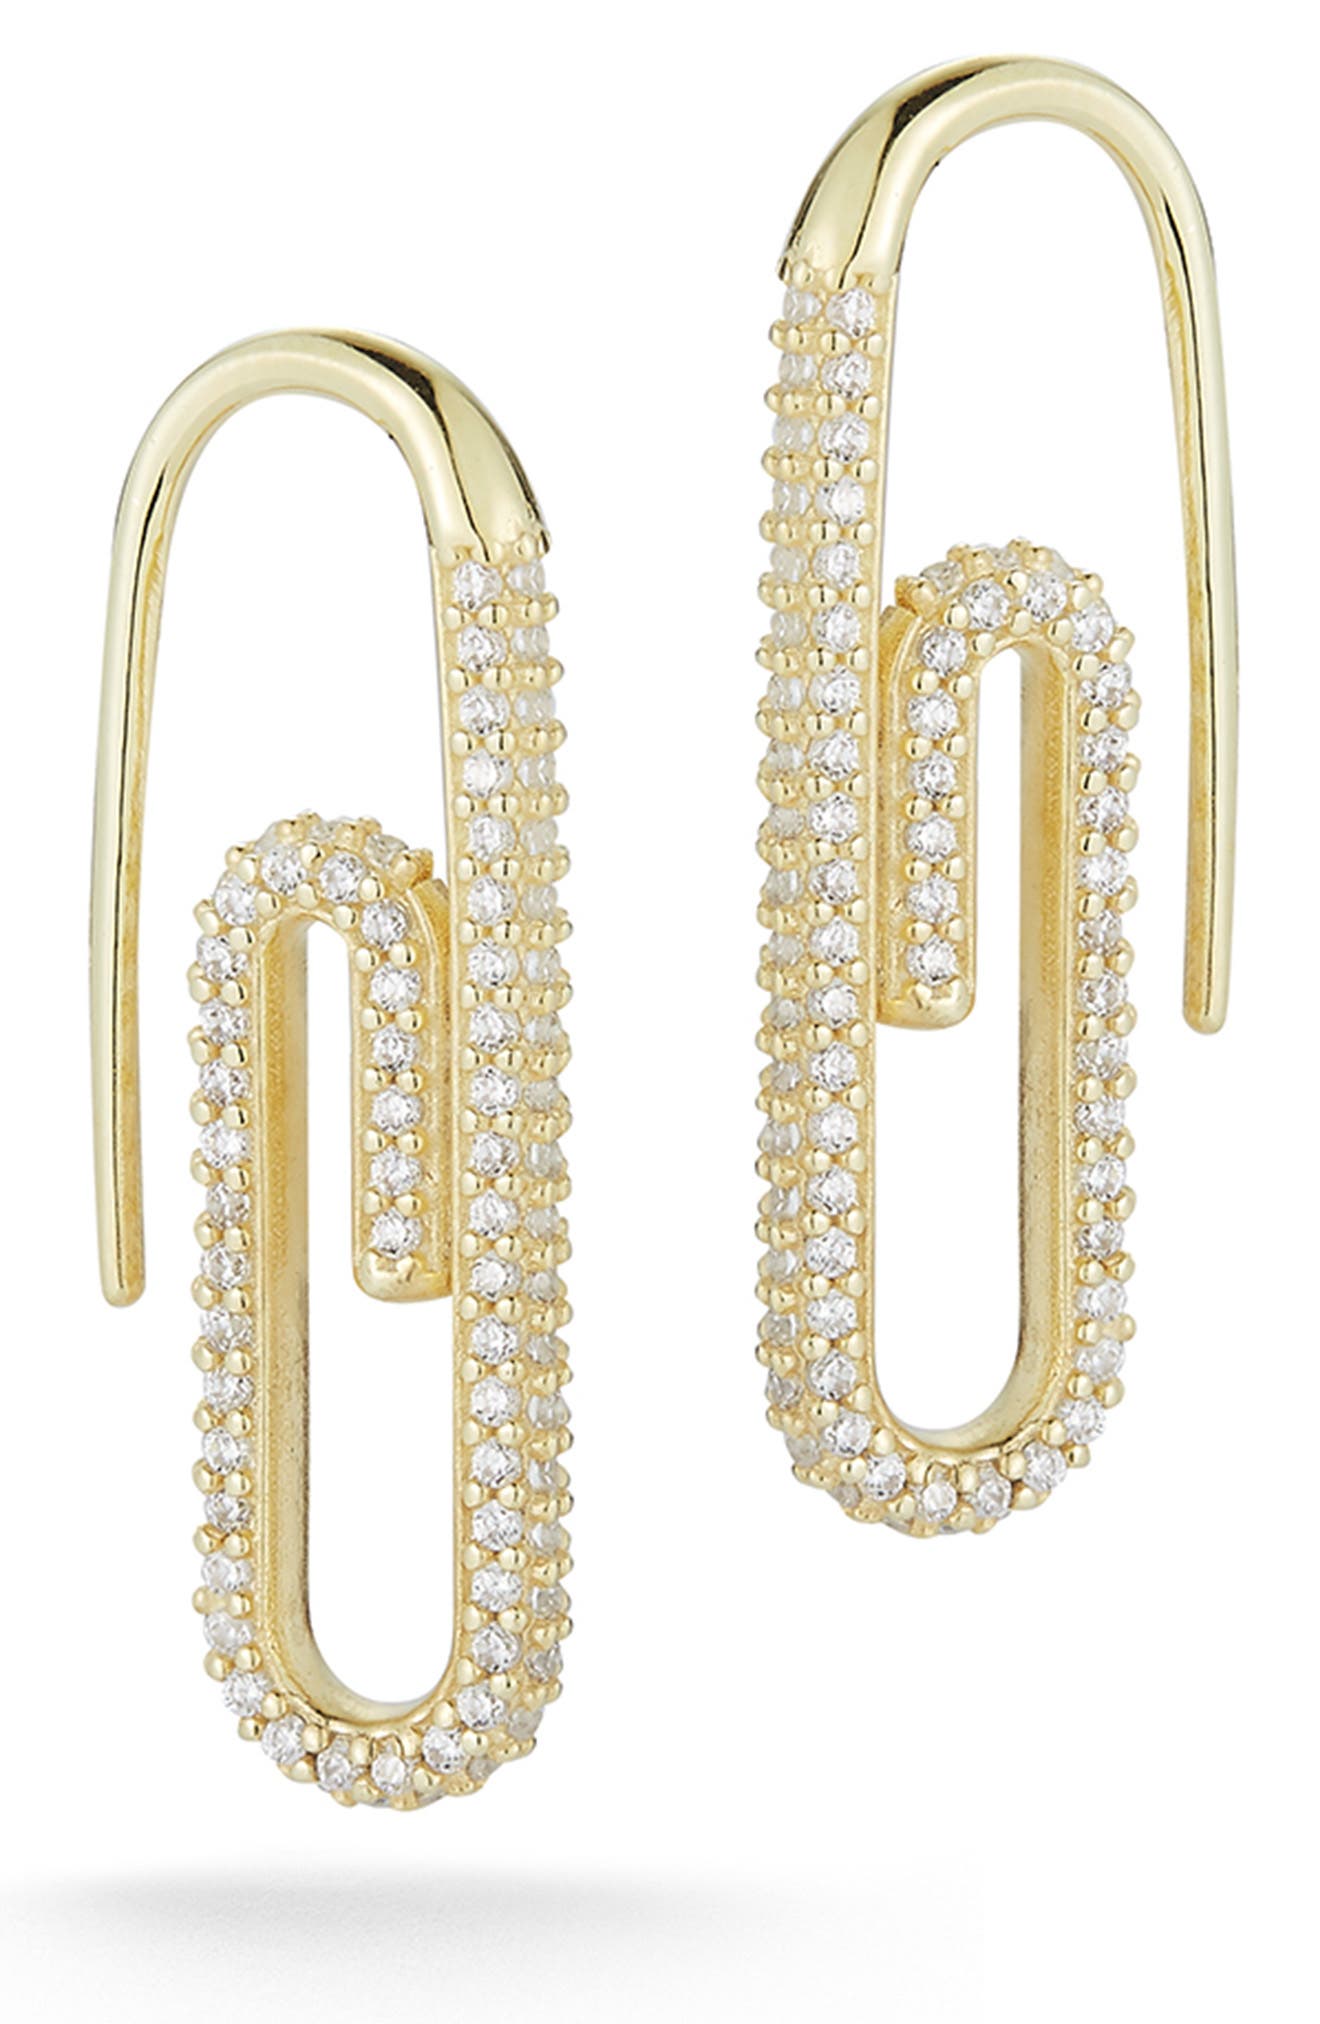 14K Gold Plated Rhinestone Crystal Paper Clip Earrings